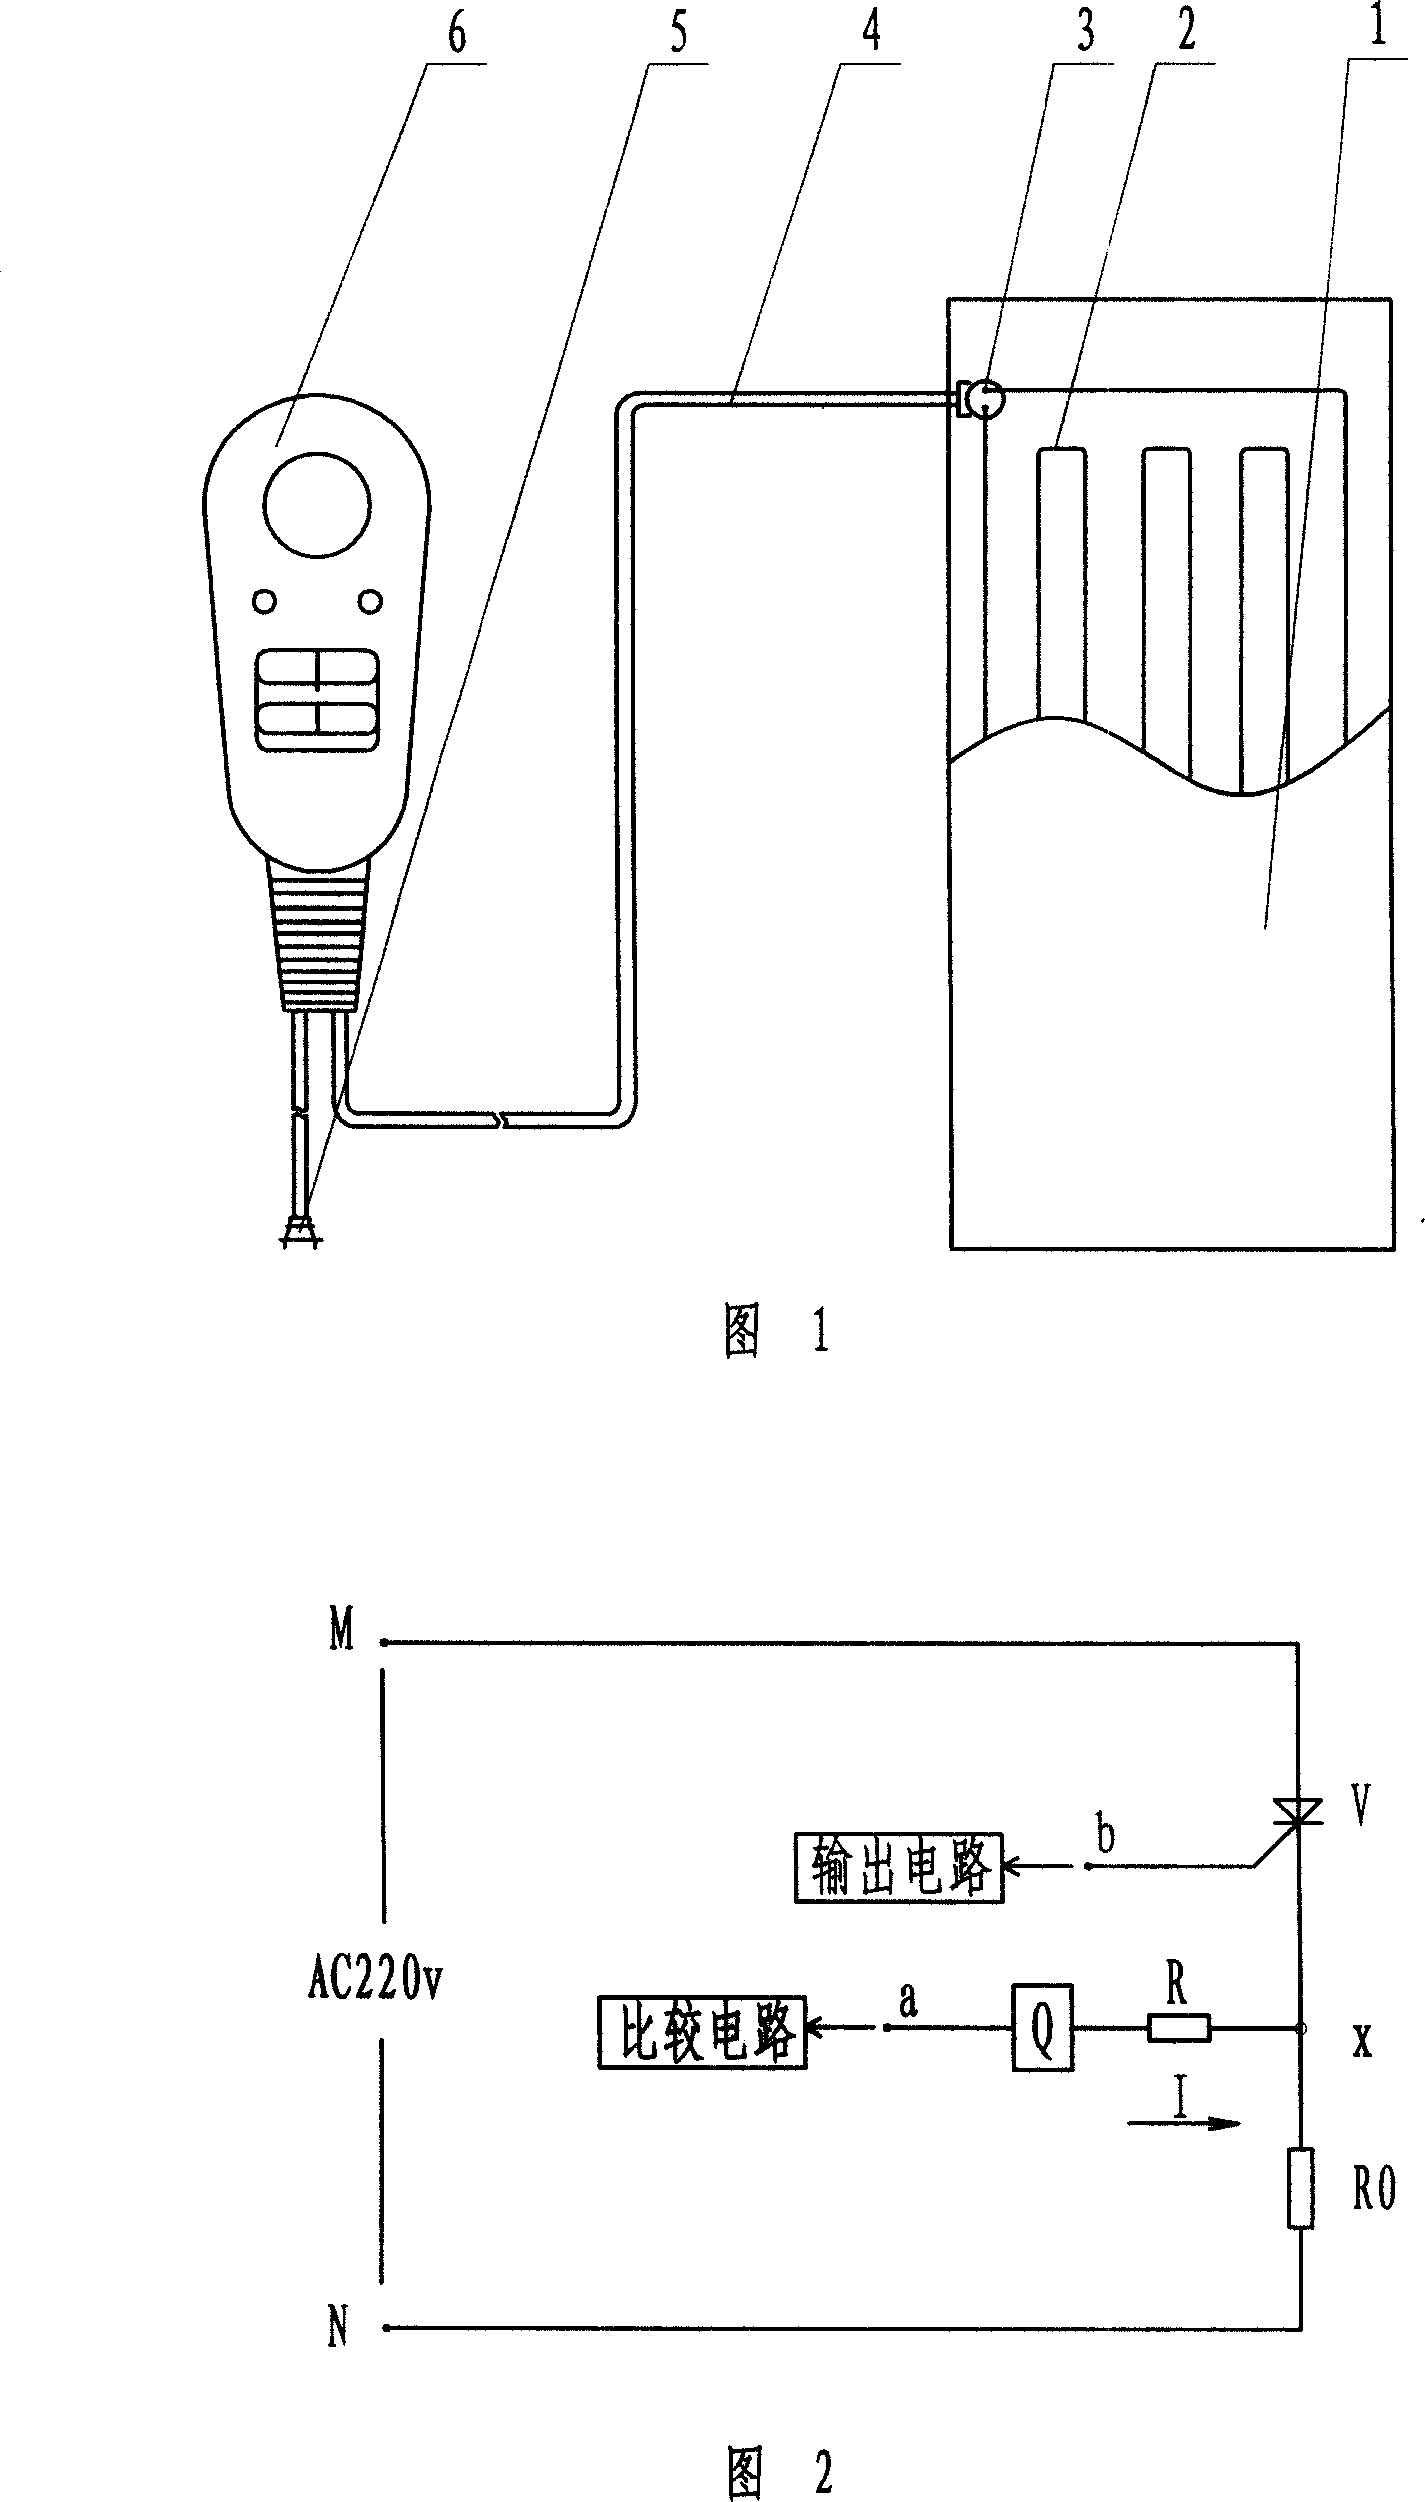 Whole circuit temperature-controlling electric heating device